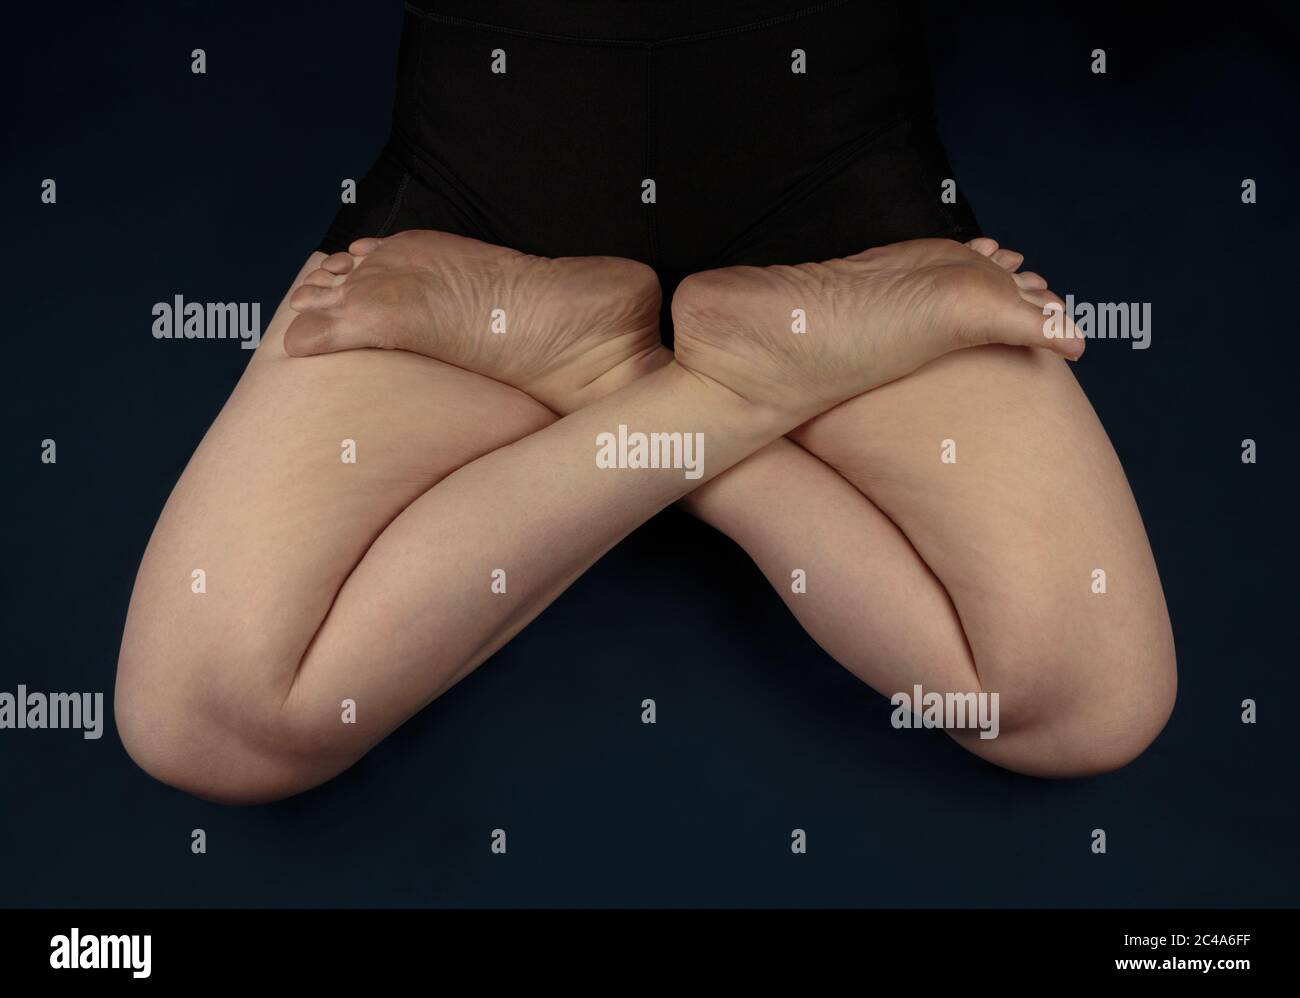 a woman's bare legs in the lotus yoga pose or padmasana shot from above on  a dark blue background Stock Photo - Alamy